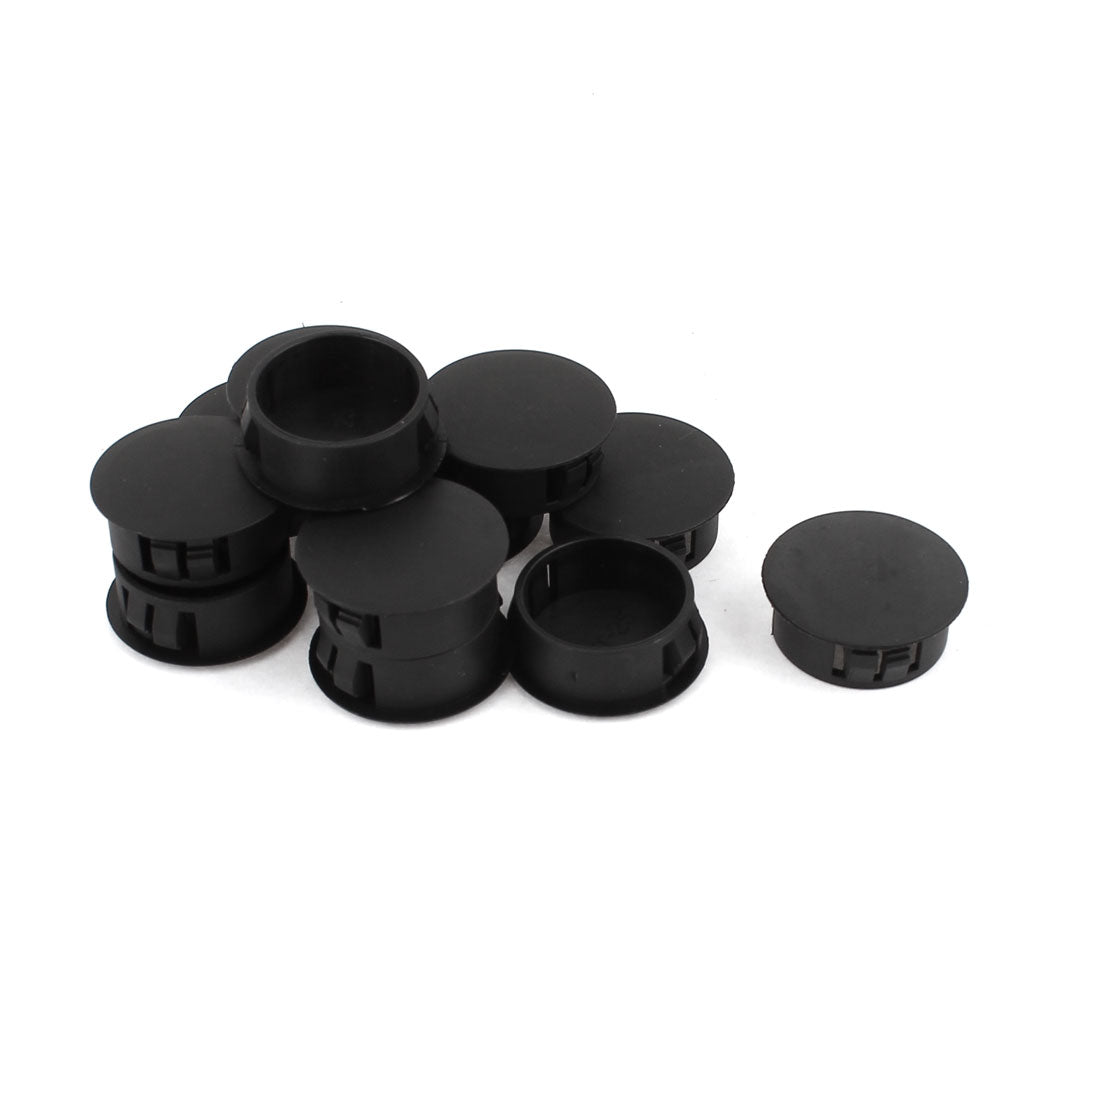 uxcell Uxcell SKT-25 Black Plastic Round Snap in Mounting Locking 25mm Panel Hole Cover 12 Pcs